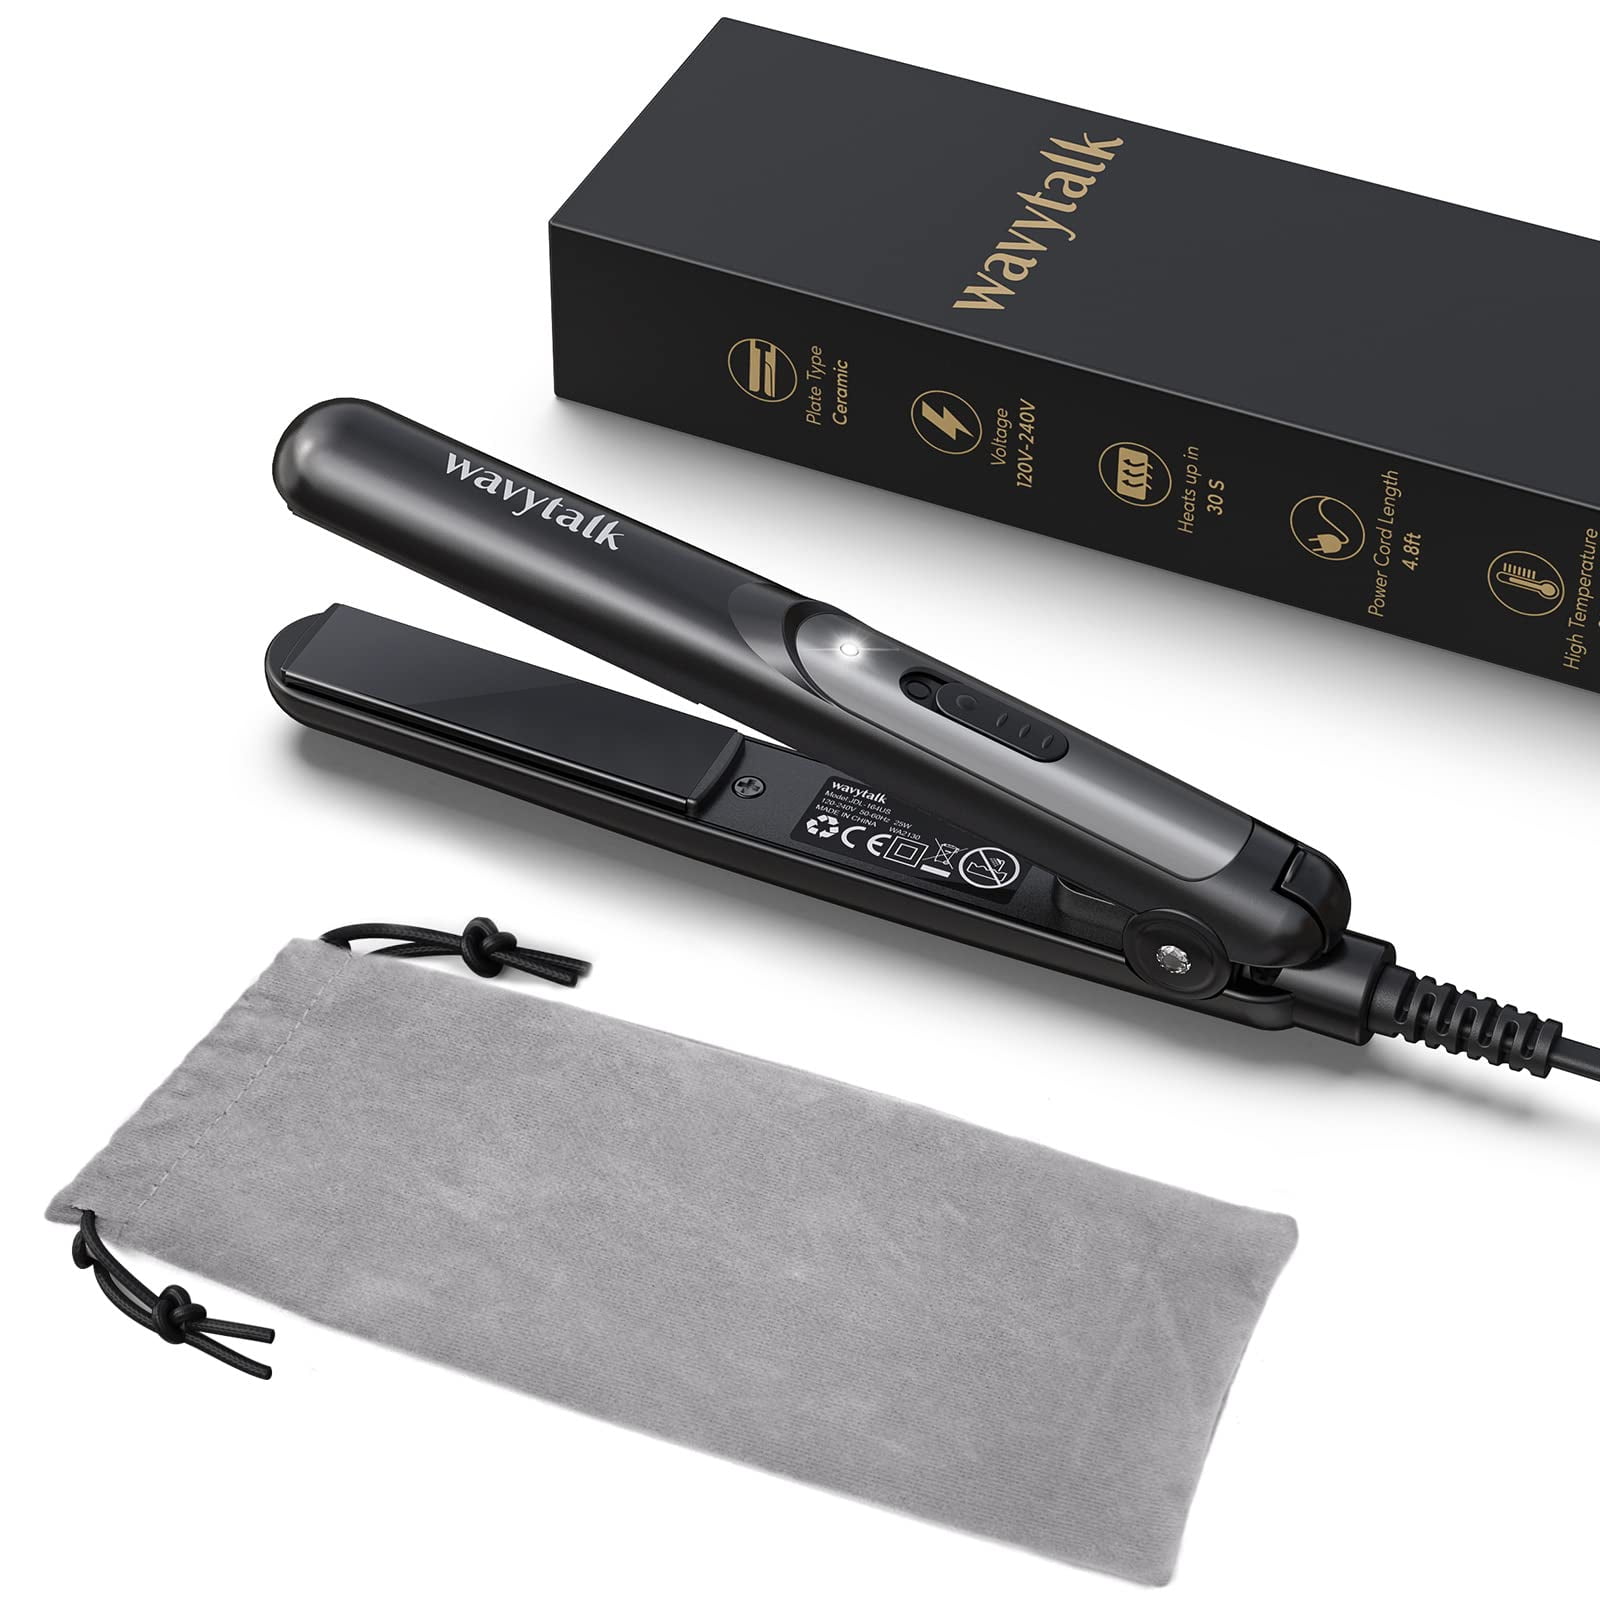 This mini flat iron was $5 at target… I bought it on a whim. Hopefully, flat  iron